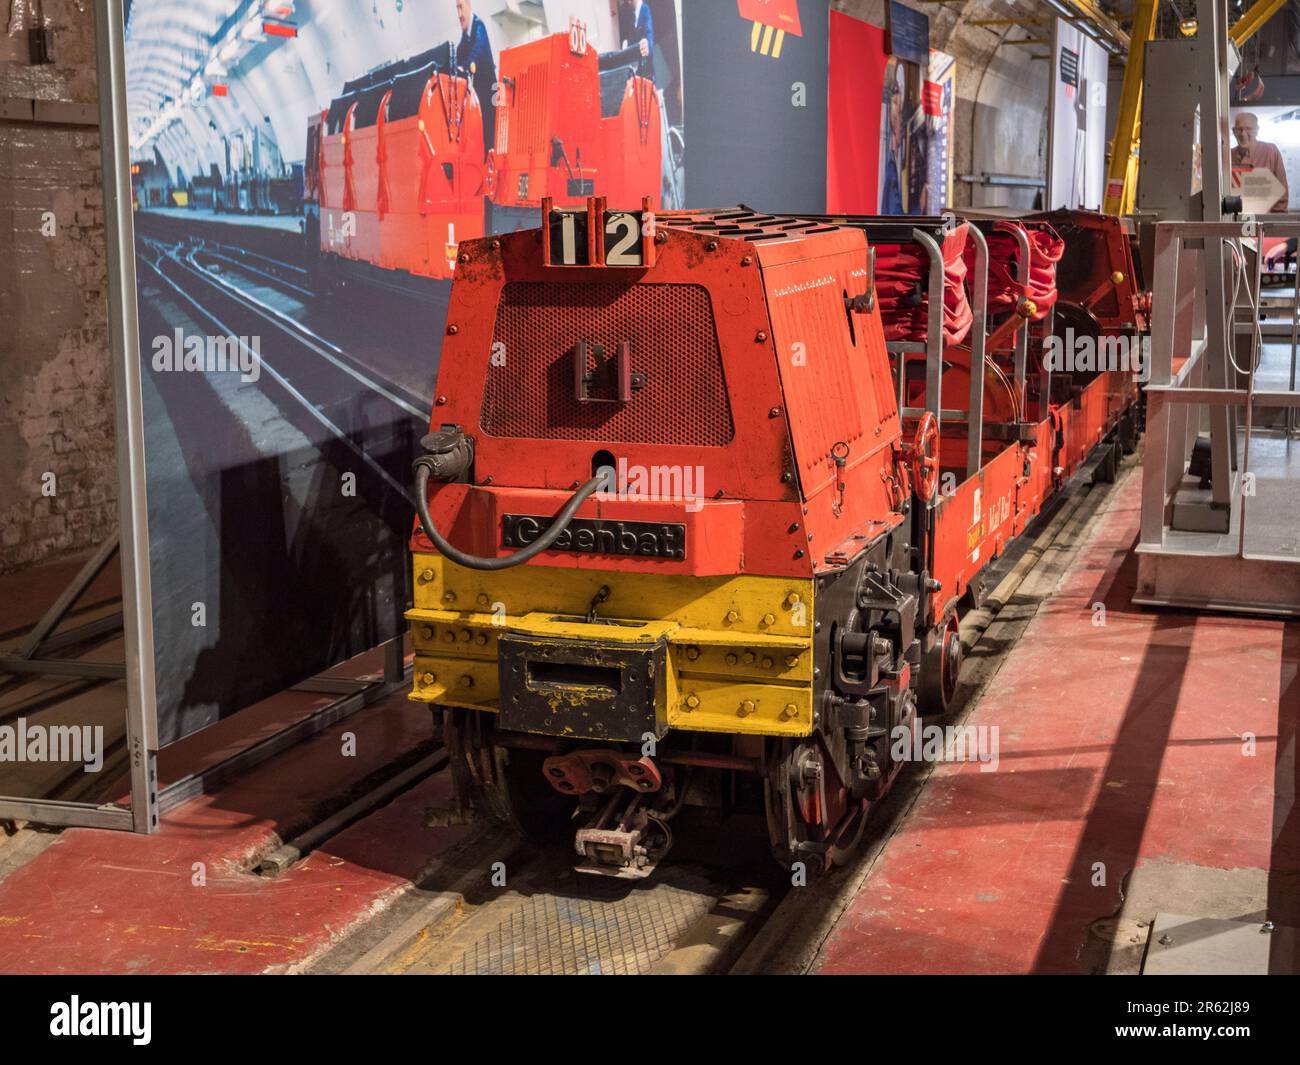 A 1980's rail car used to transport mail on display in the Mail Rail Museum in London, UK. Stock Photo